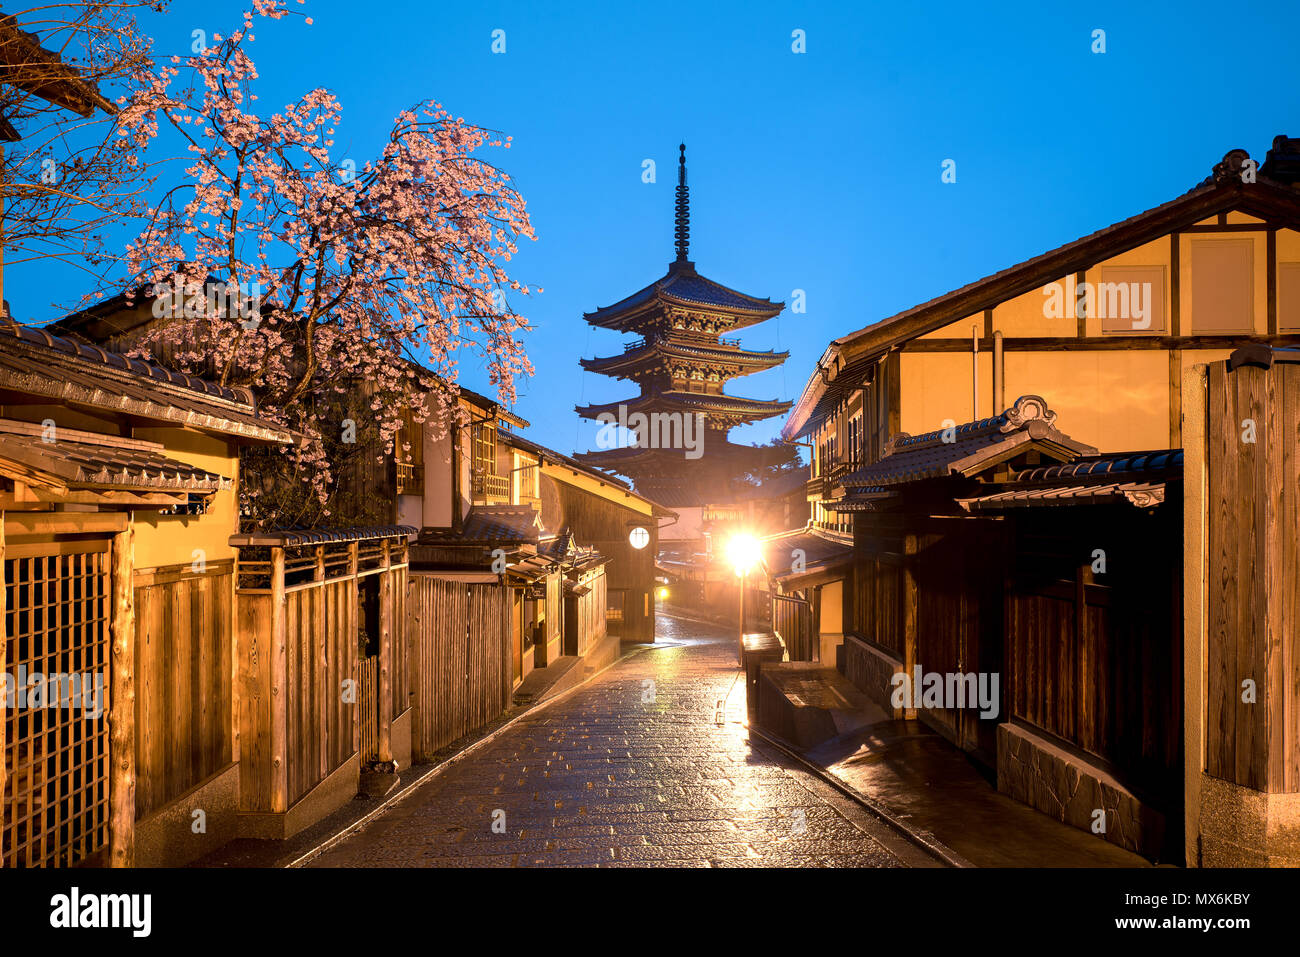 Japanese pagoda and old house with cherry blossom in Kyoto at twilight. Stock Photo